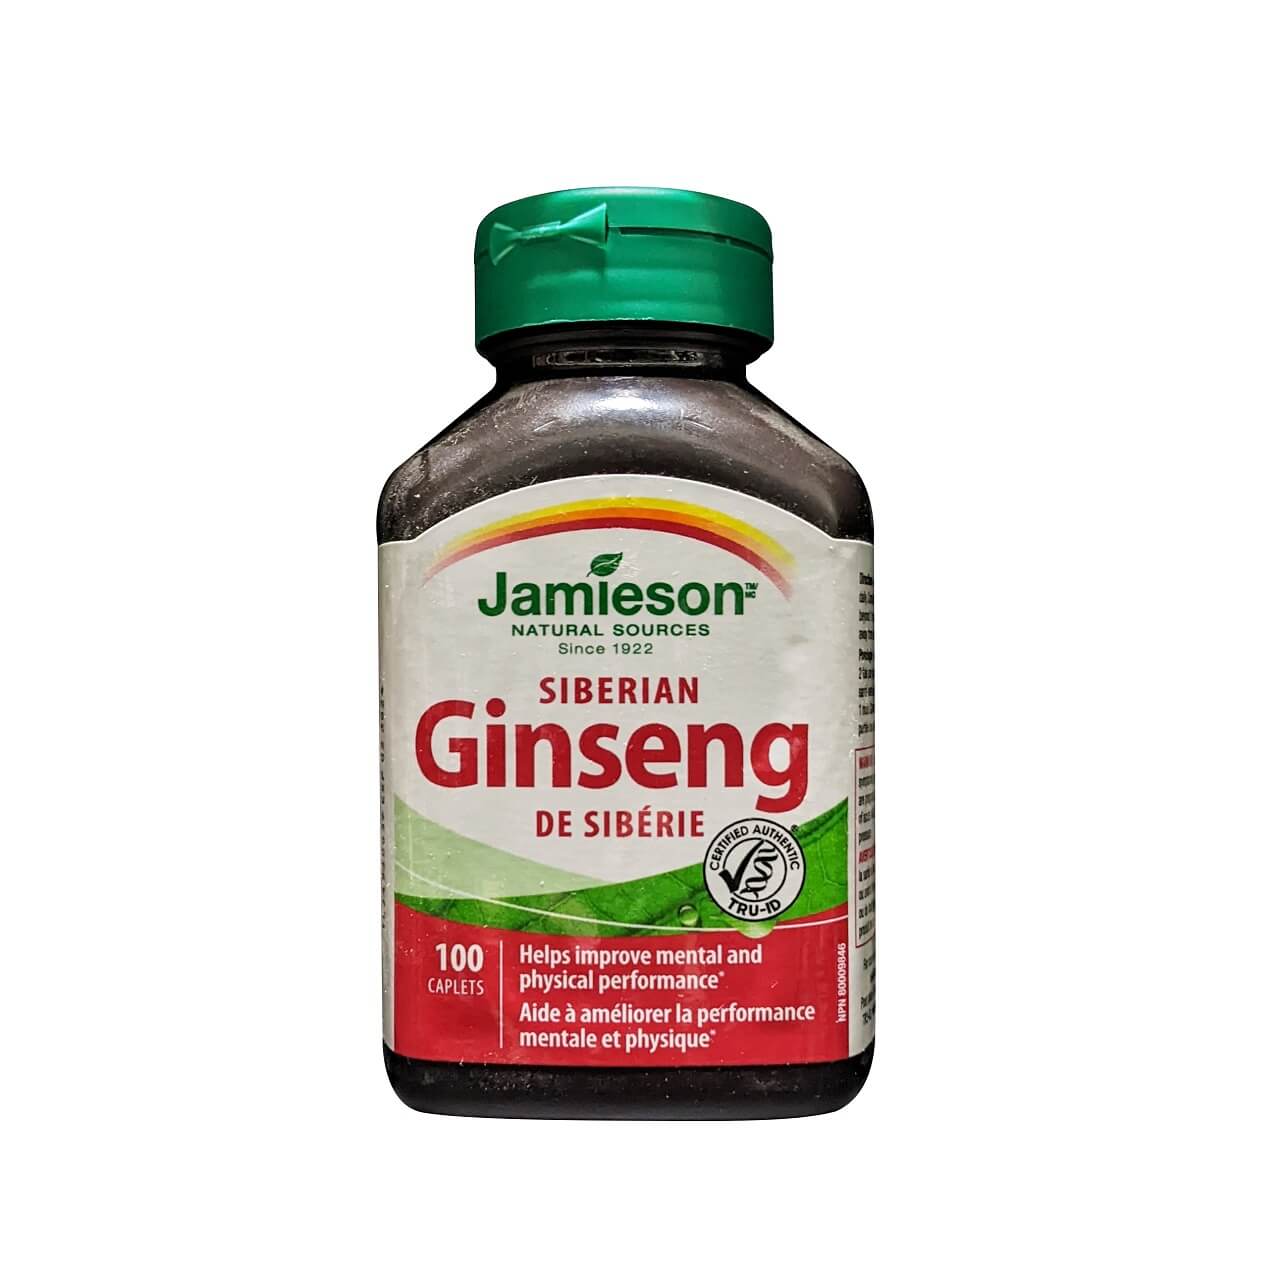 Product label for Jamieson Siberian Ginseng (100 caplets)